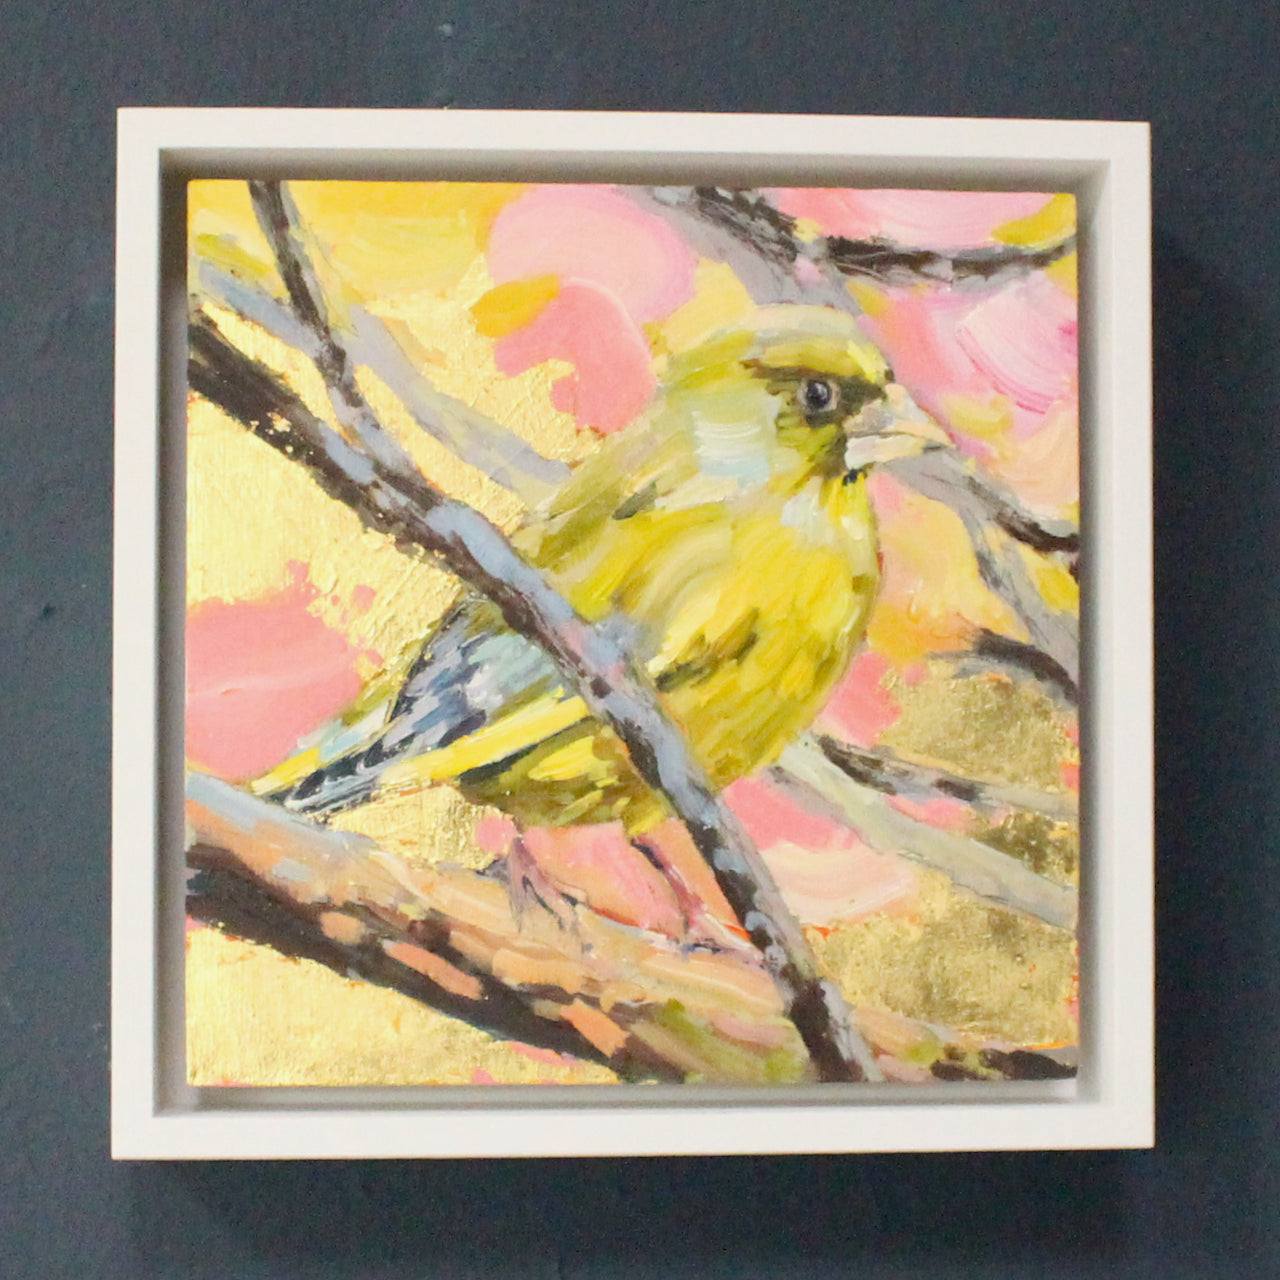 Jill Hudson painting of a greenfinch on a branch with a pink, yellow and gold background